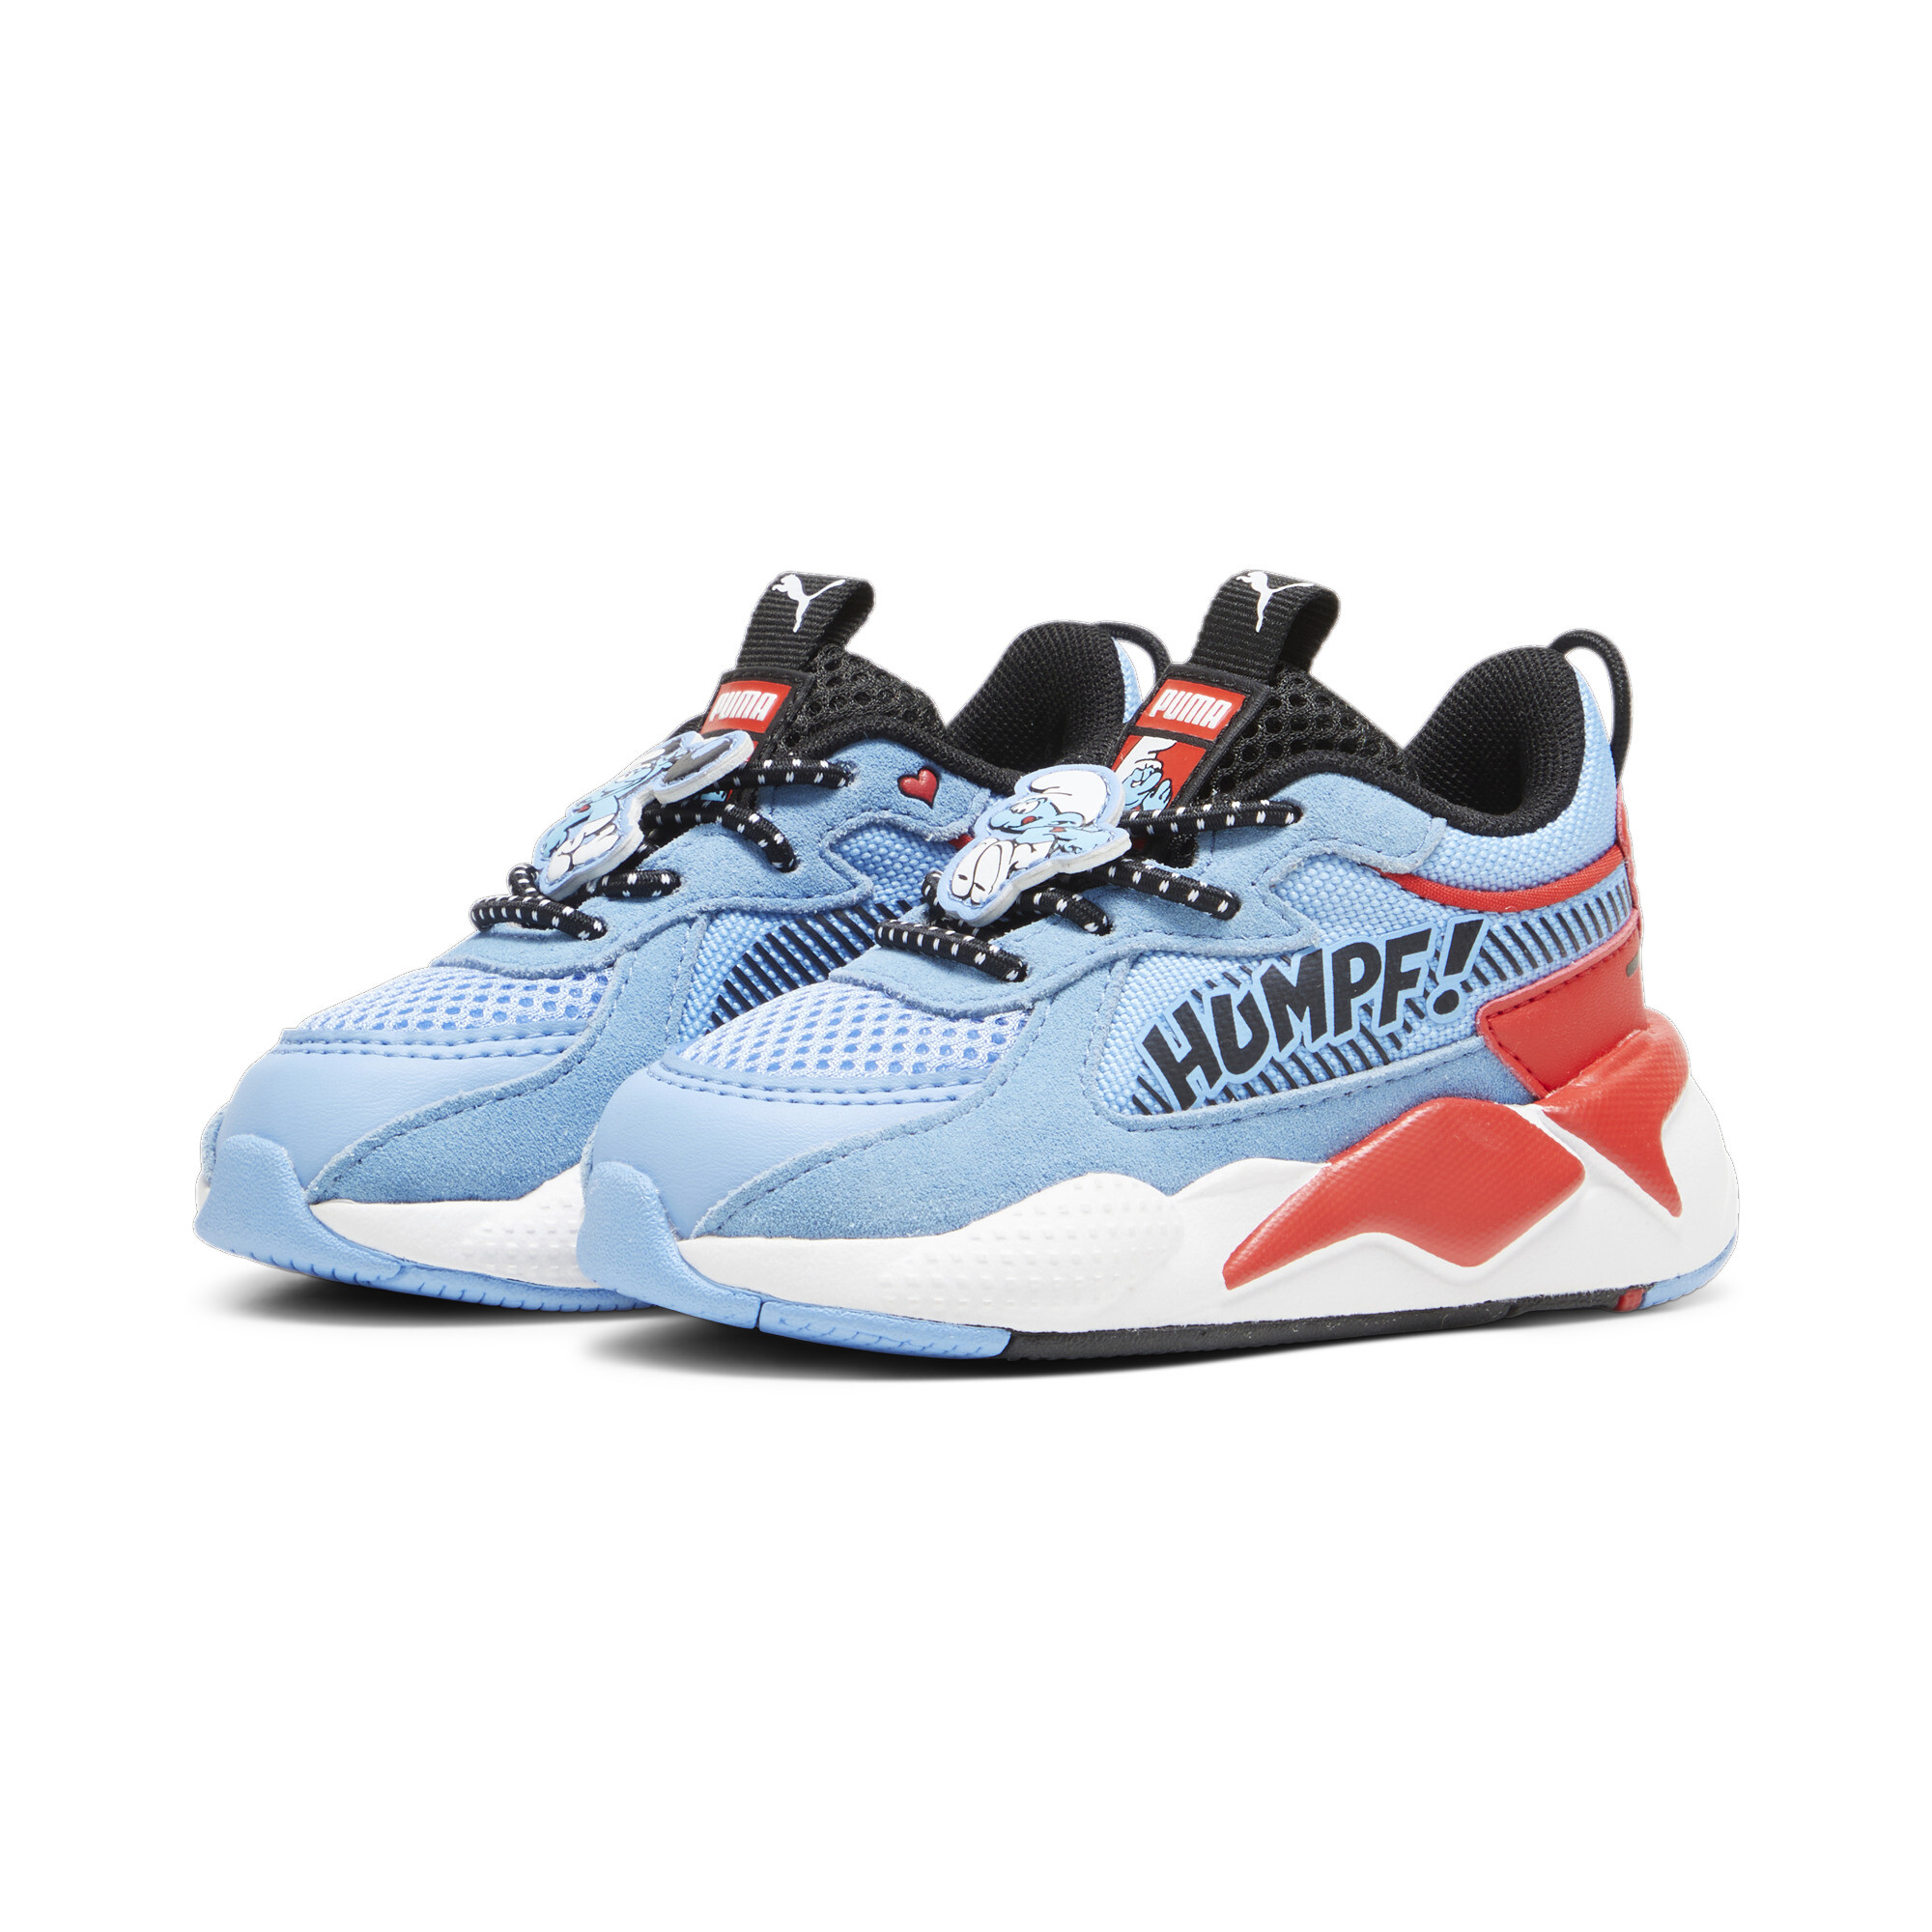 Kids' PUMA X THE SMURFS RS-X Toddlers' Sneakers In Blue, Size EU 26